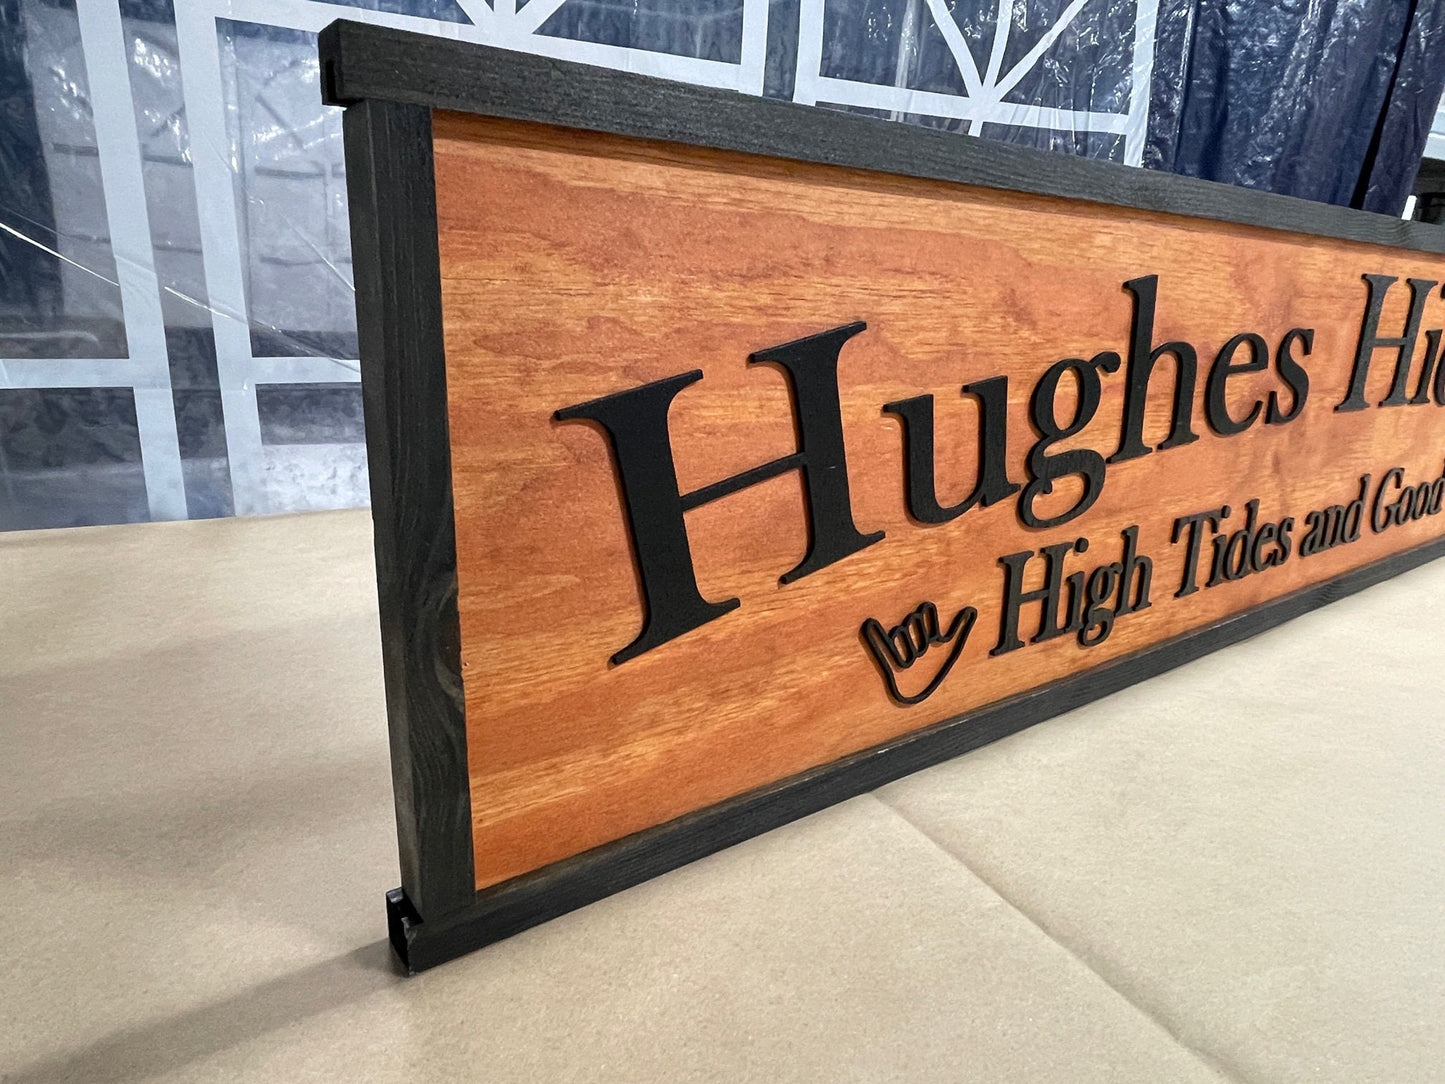 Large Custom Ranch Sign High Tides Good Vibes Over-sized Rustic Business Logo Wood Laser Cut Out 3D Extra Large Sign Footstepsinthepast